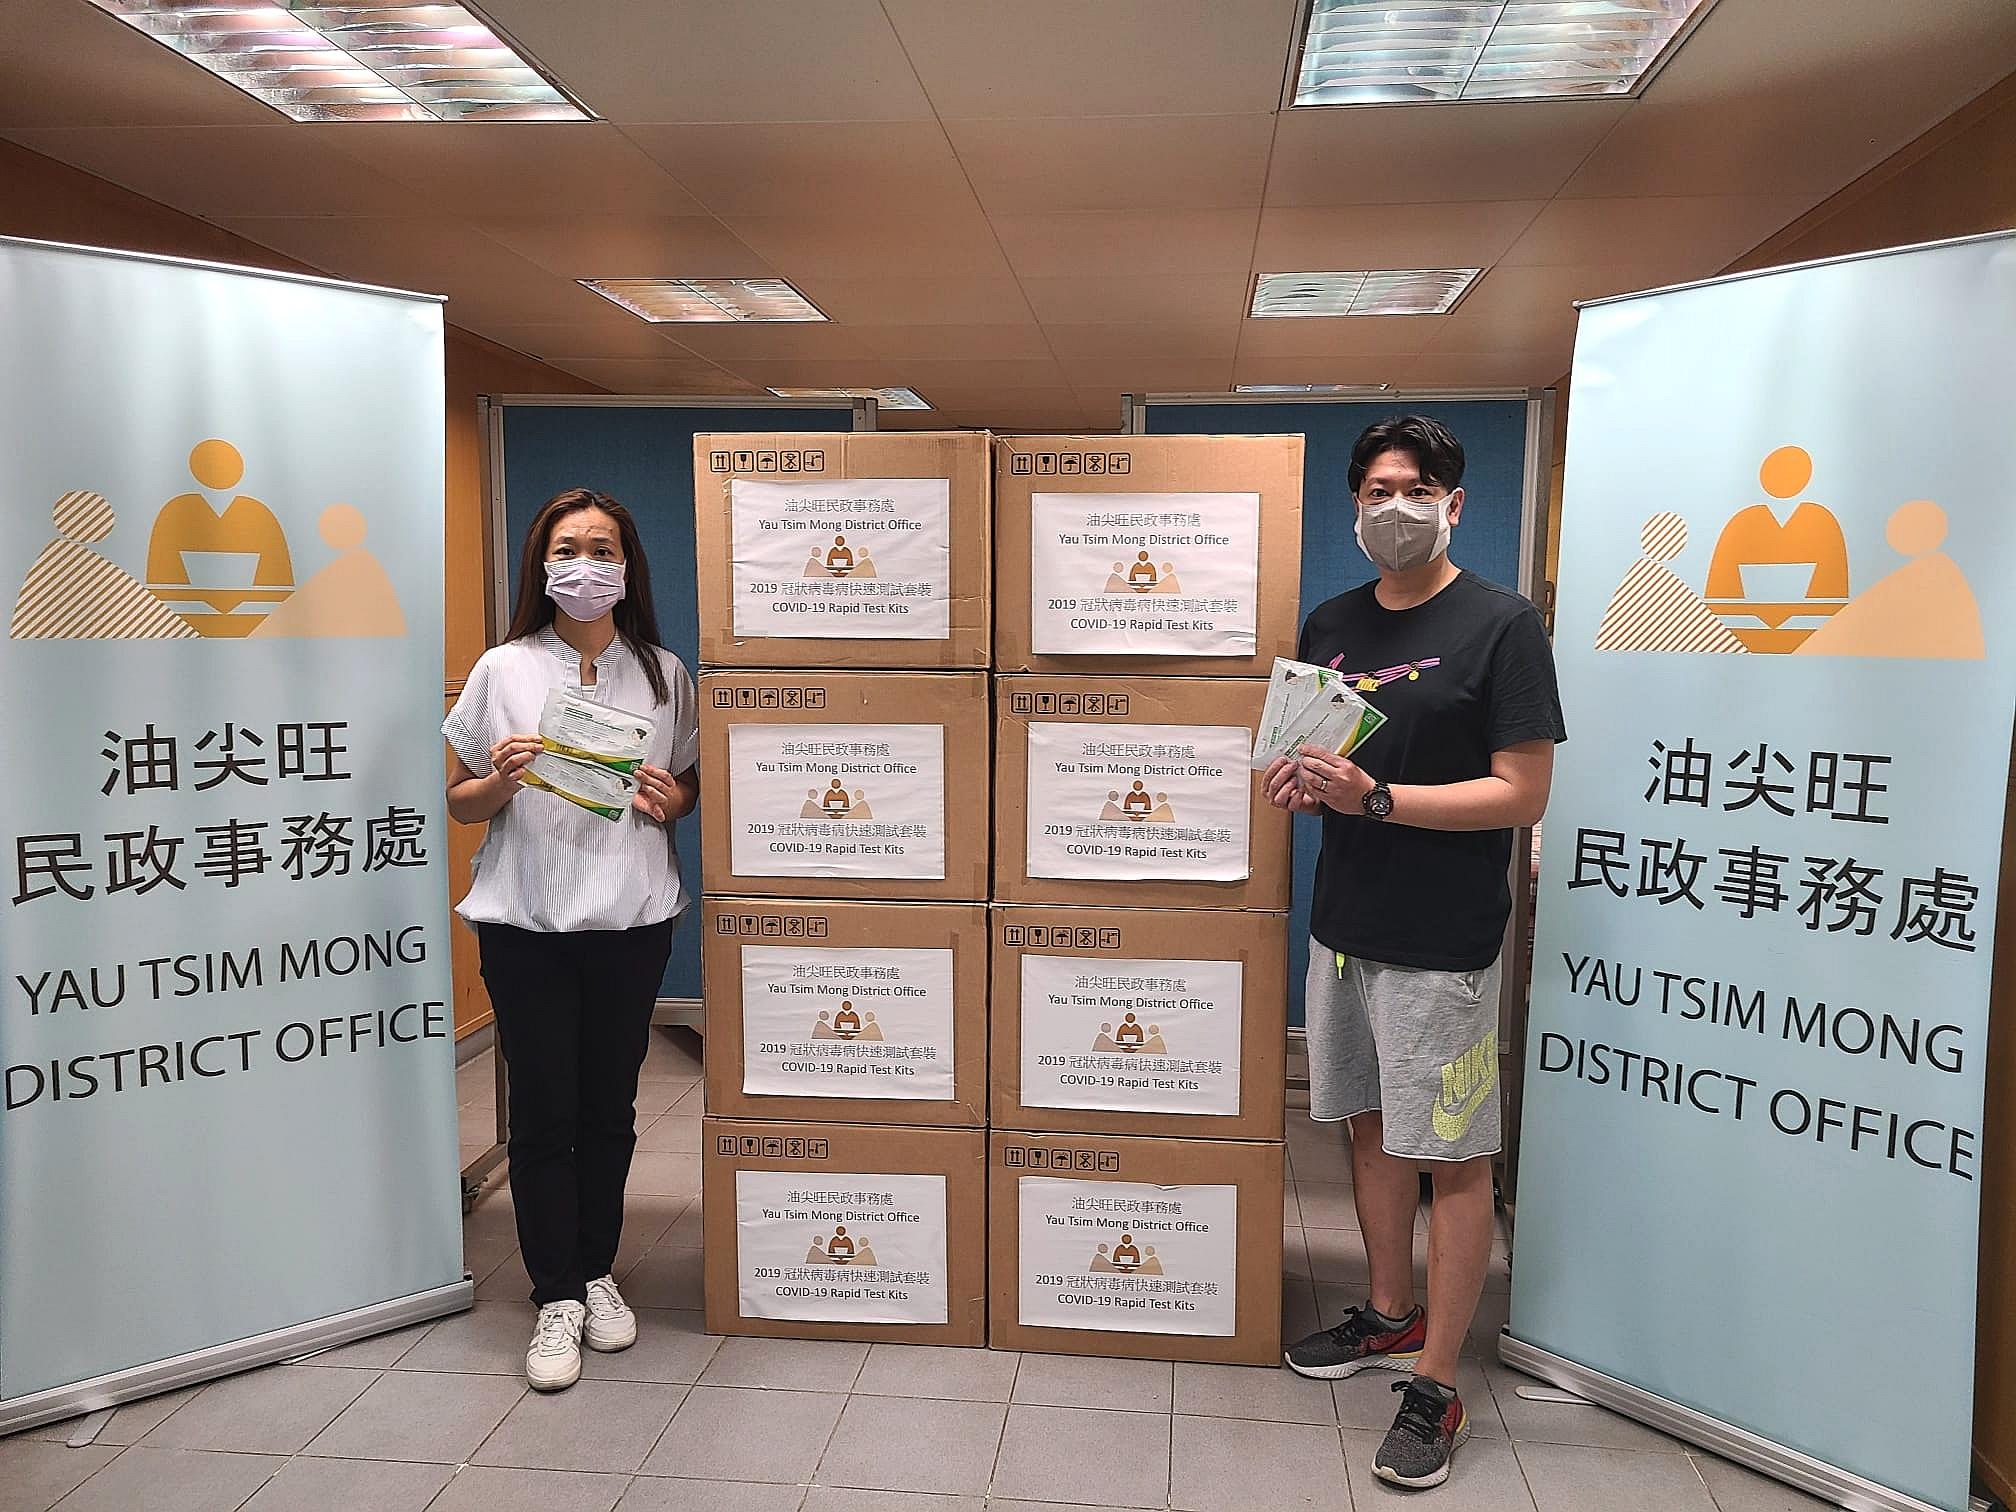 The Yau Tsim Mong District Office today (June 21) distributed COVID-19 rapid test kits to households, cleansing workers and property management staff living and working in Island Harbourview for voluntary testing through the property management company.